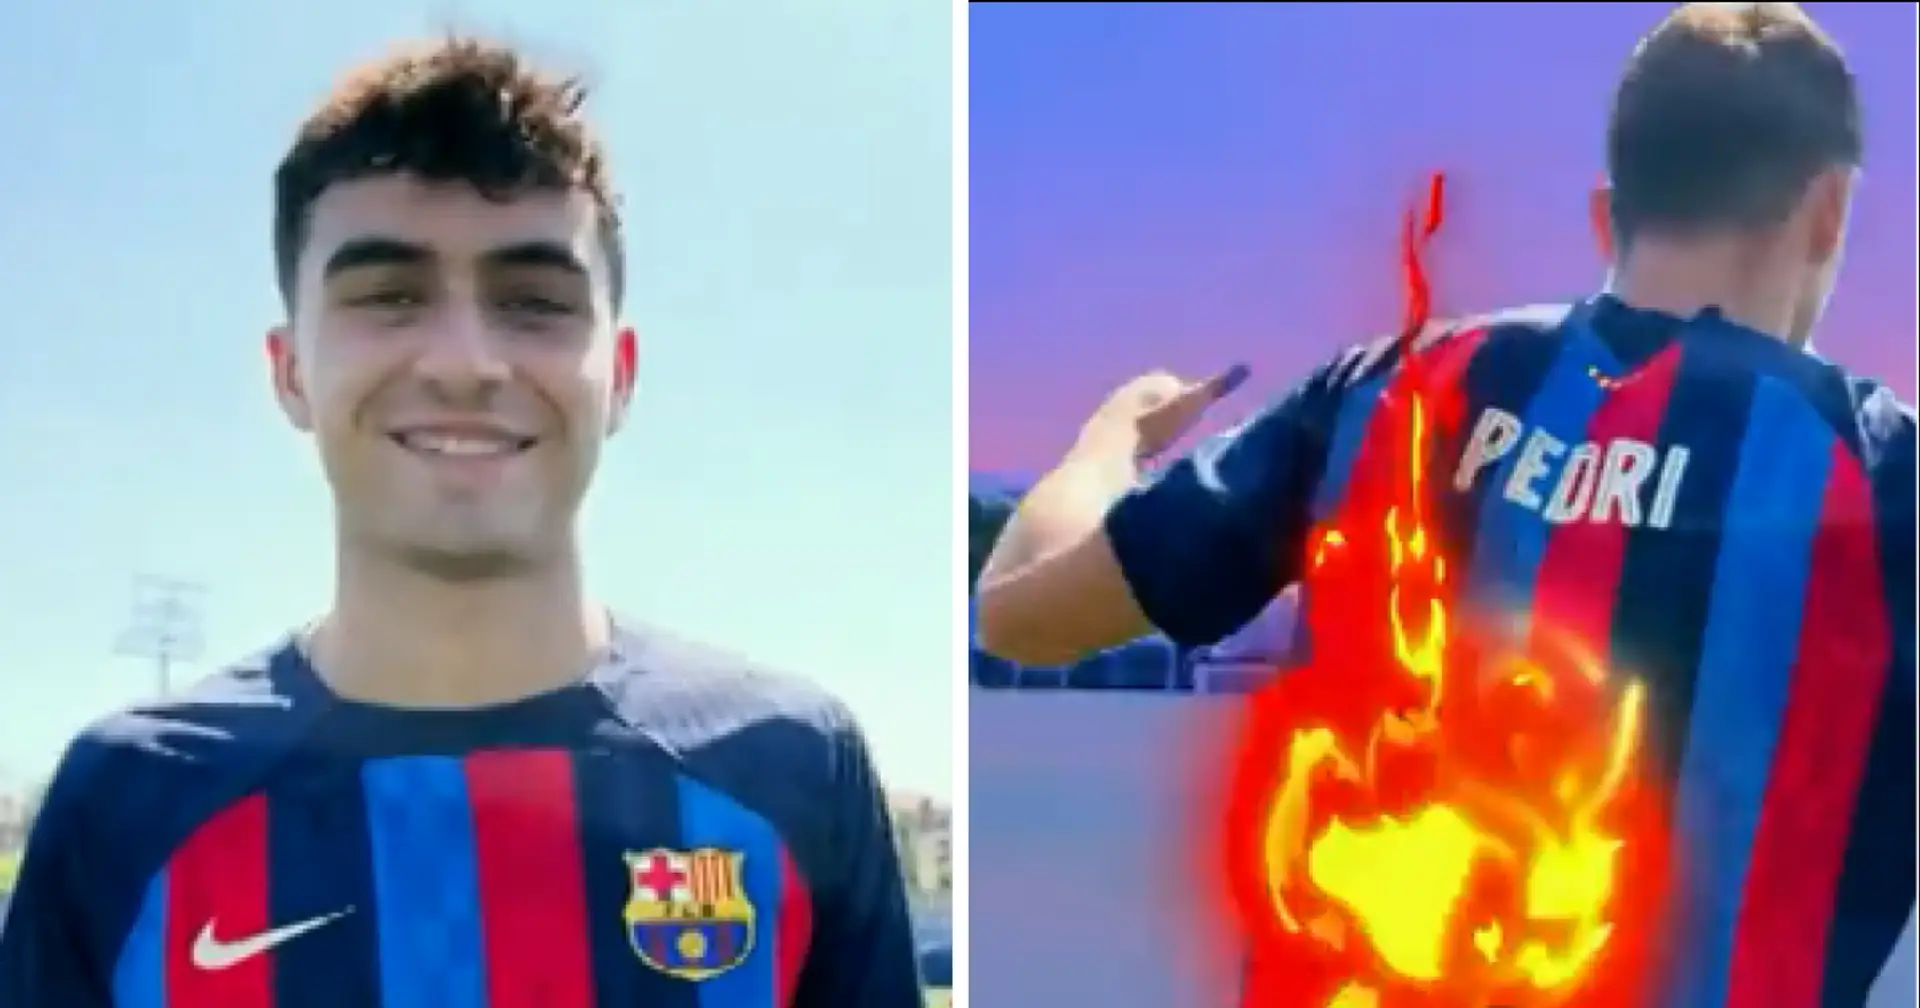 Official: Barcelona confirm Pedri's new iconic shirt number